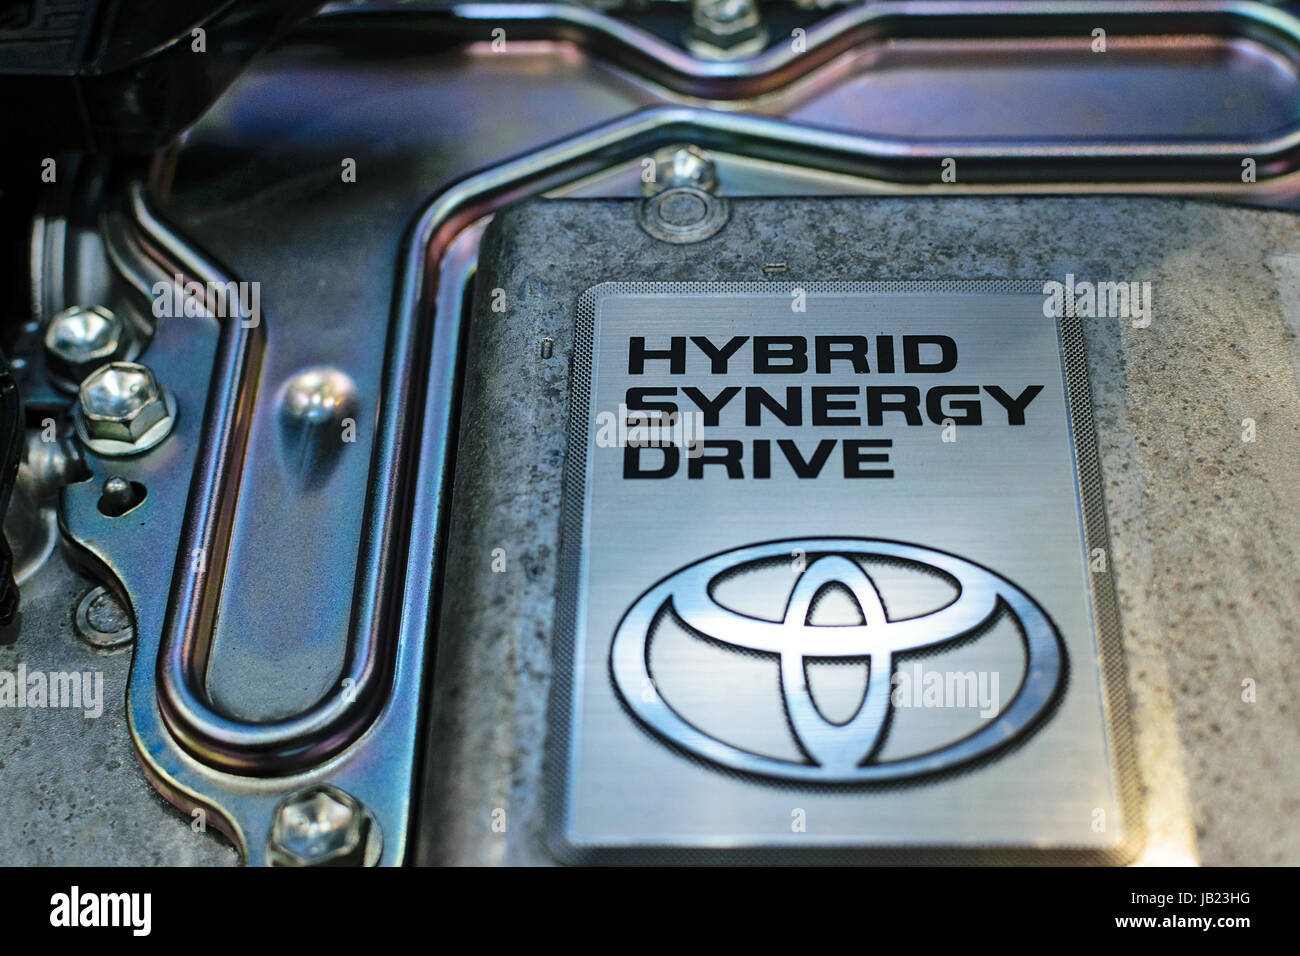 Krakow, Poland, May 21, 2017: Toyota Hybrid Synergy Drive sign close-up during MotoShow in Krakow. Toyota is a famous Japanese multinational automaker Stock Photo